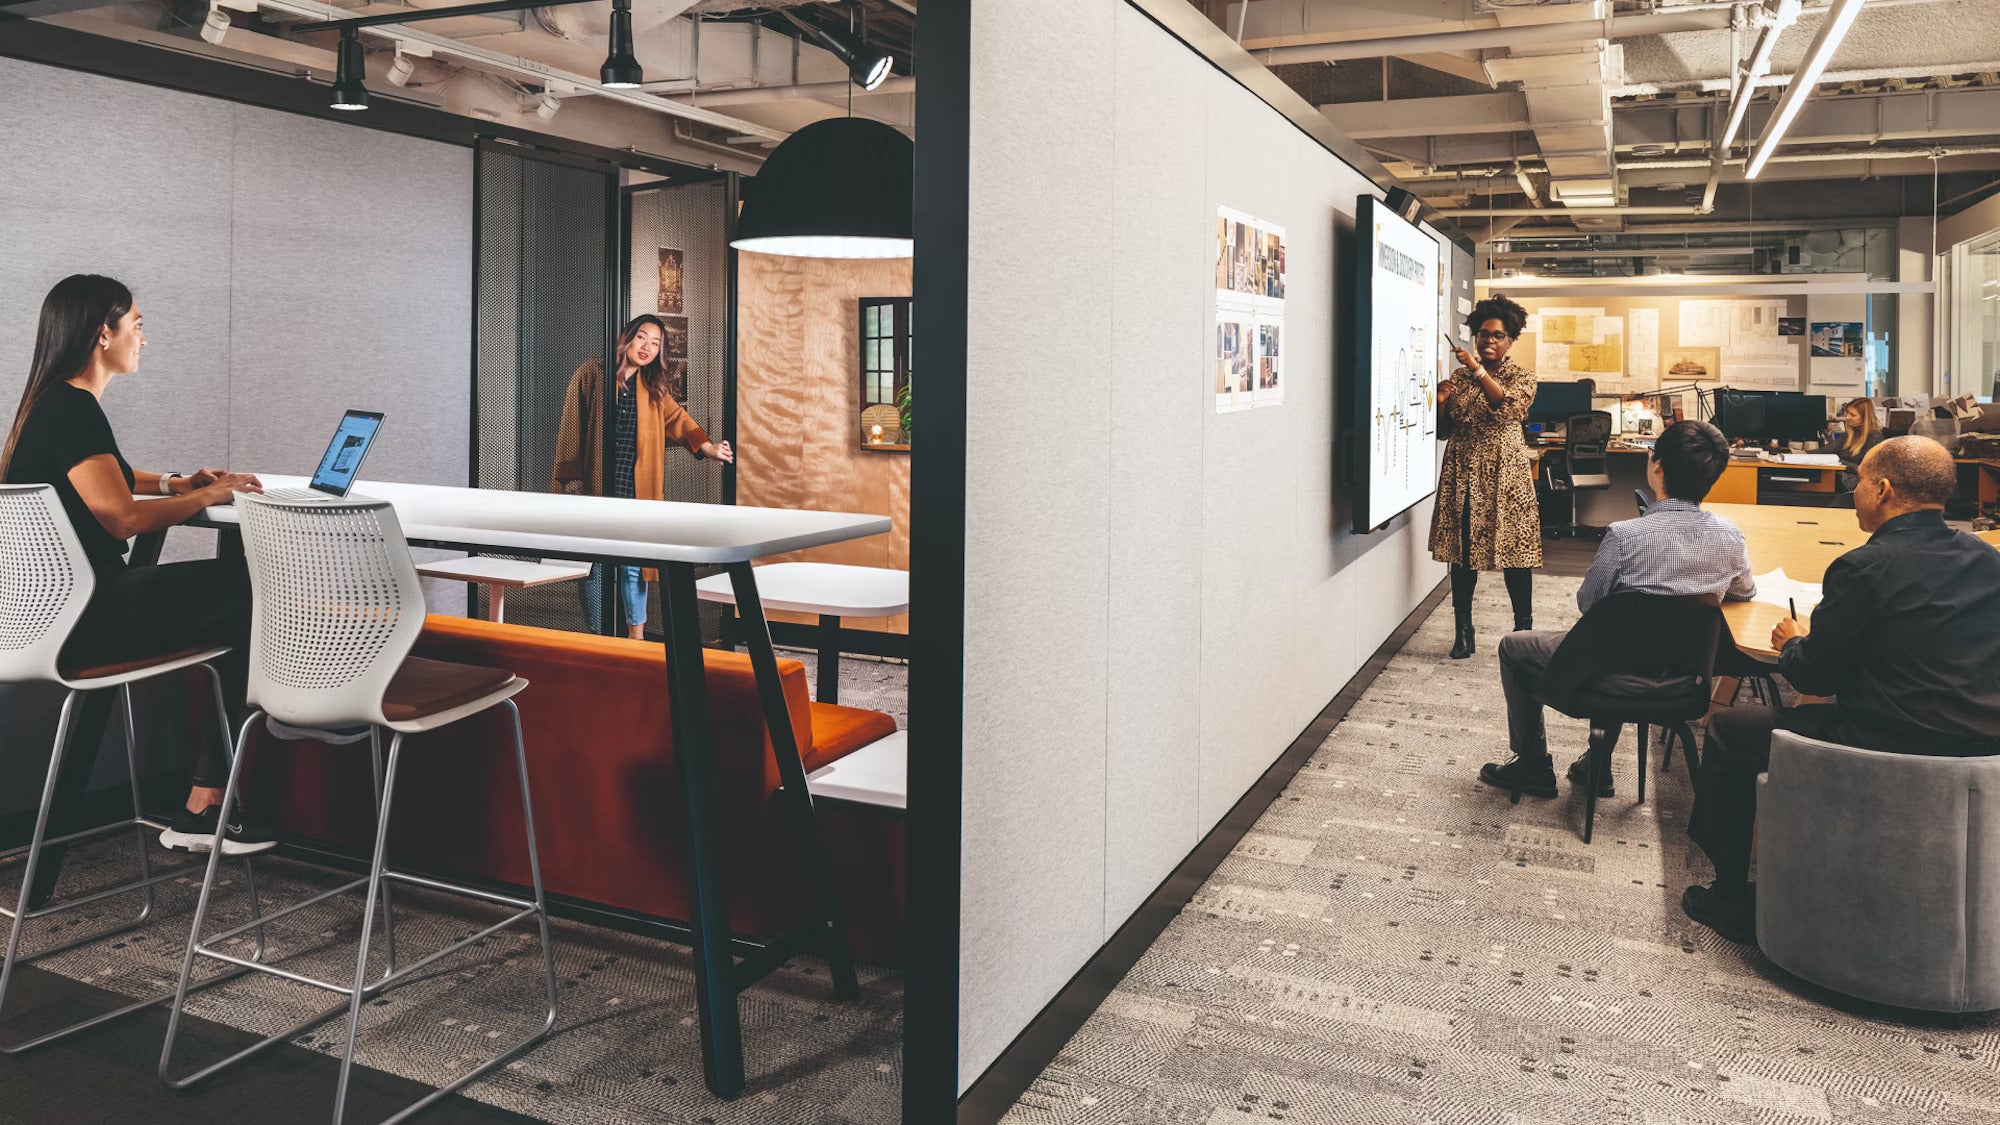 You choose: While easy reconfiguration of furnishings and spaces allows teams to modify their work points quickly, larger-scale redesign can occur seamlessly overnight or at weekends